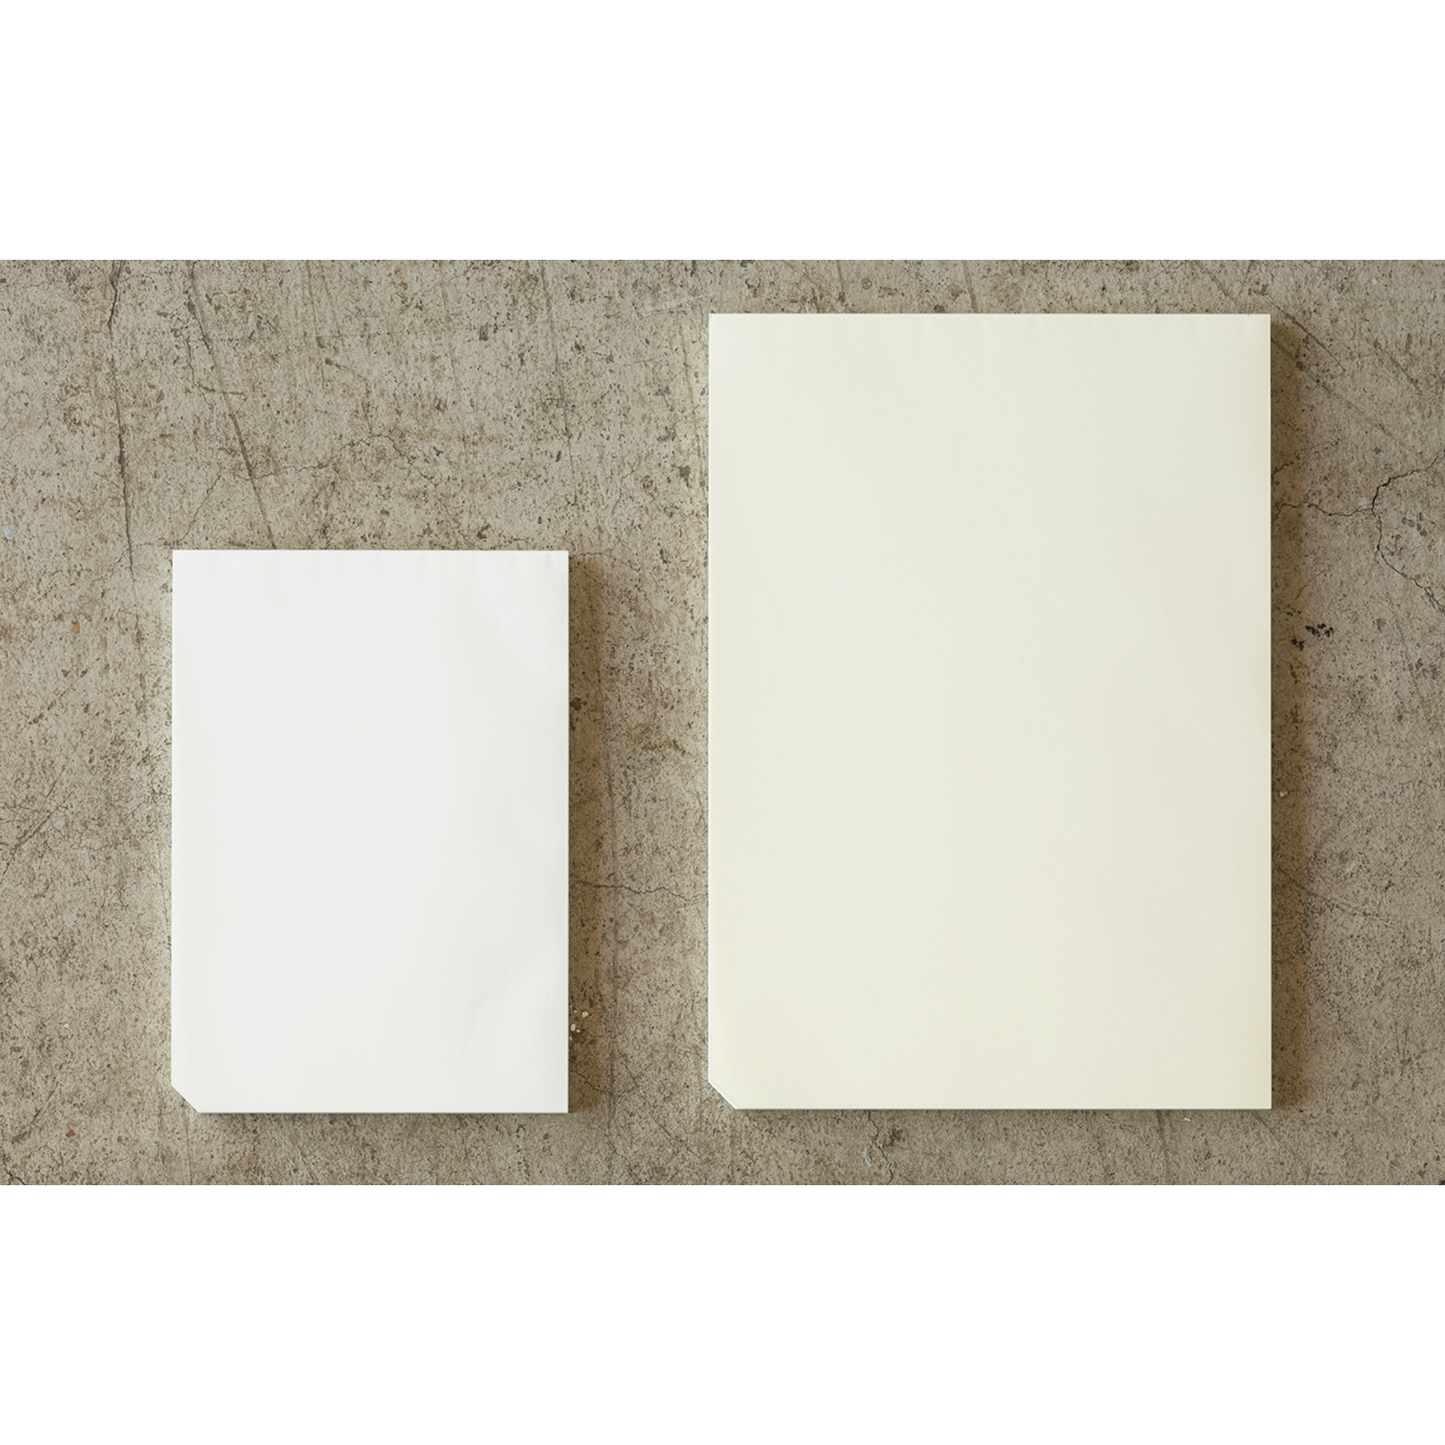 A4 Blank Cotton MD Paper Pad